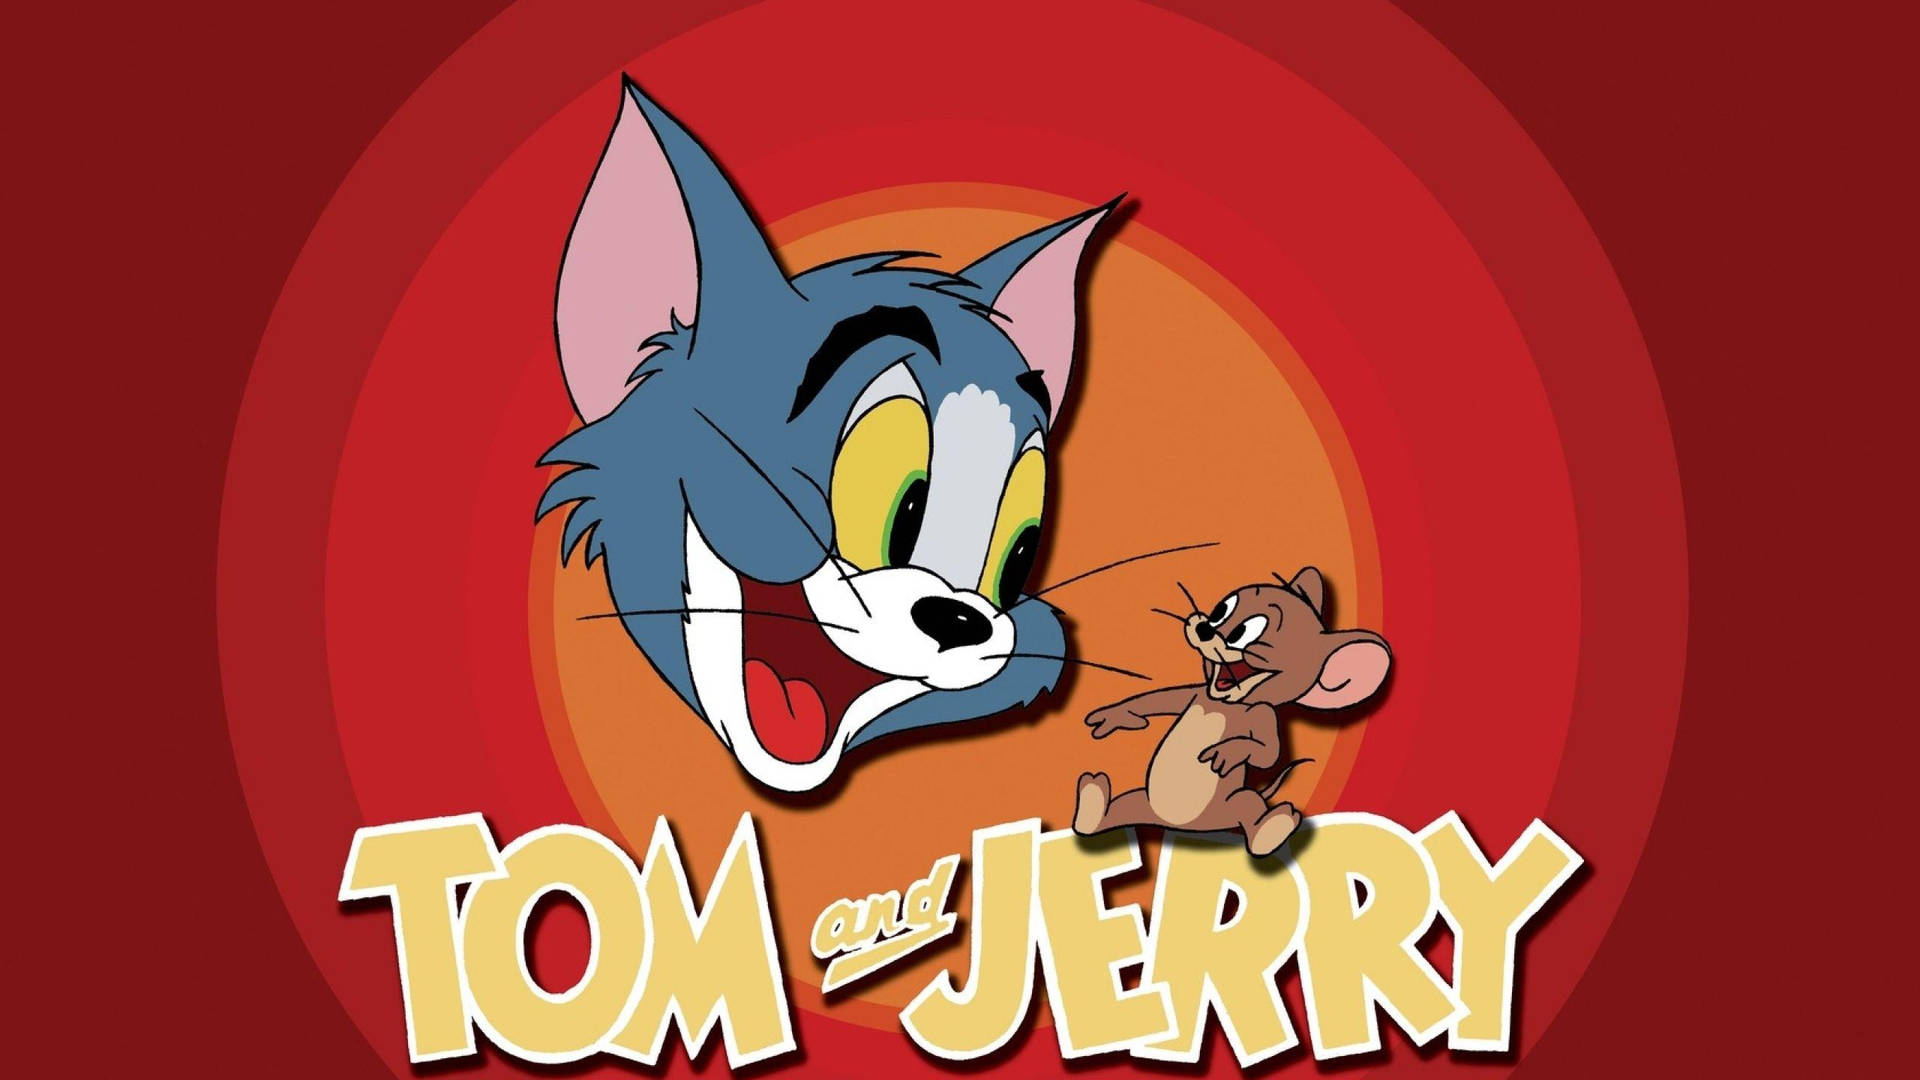 Digital Poster Of Tom Cat And Jerry